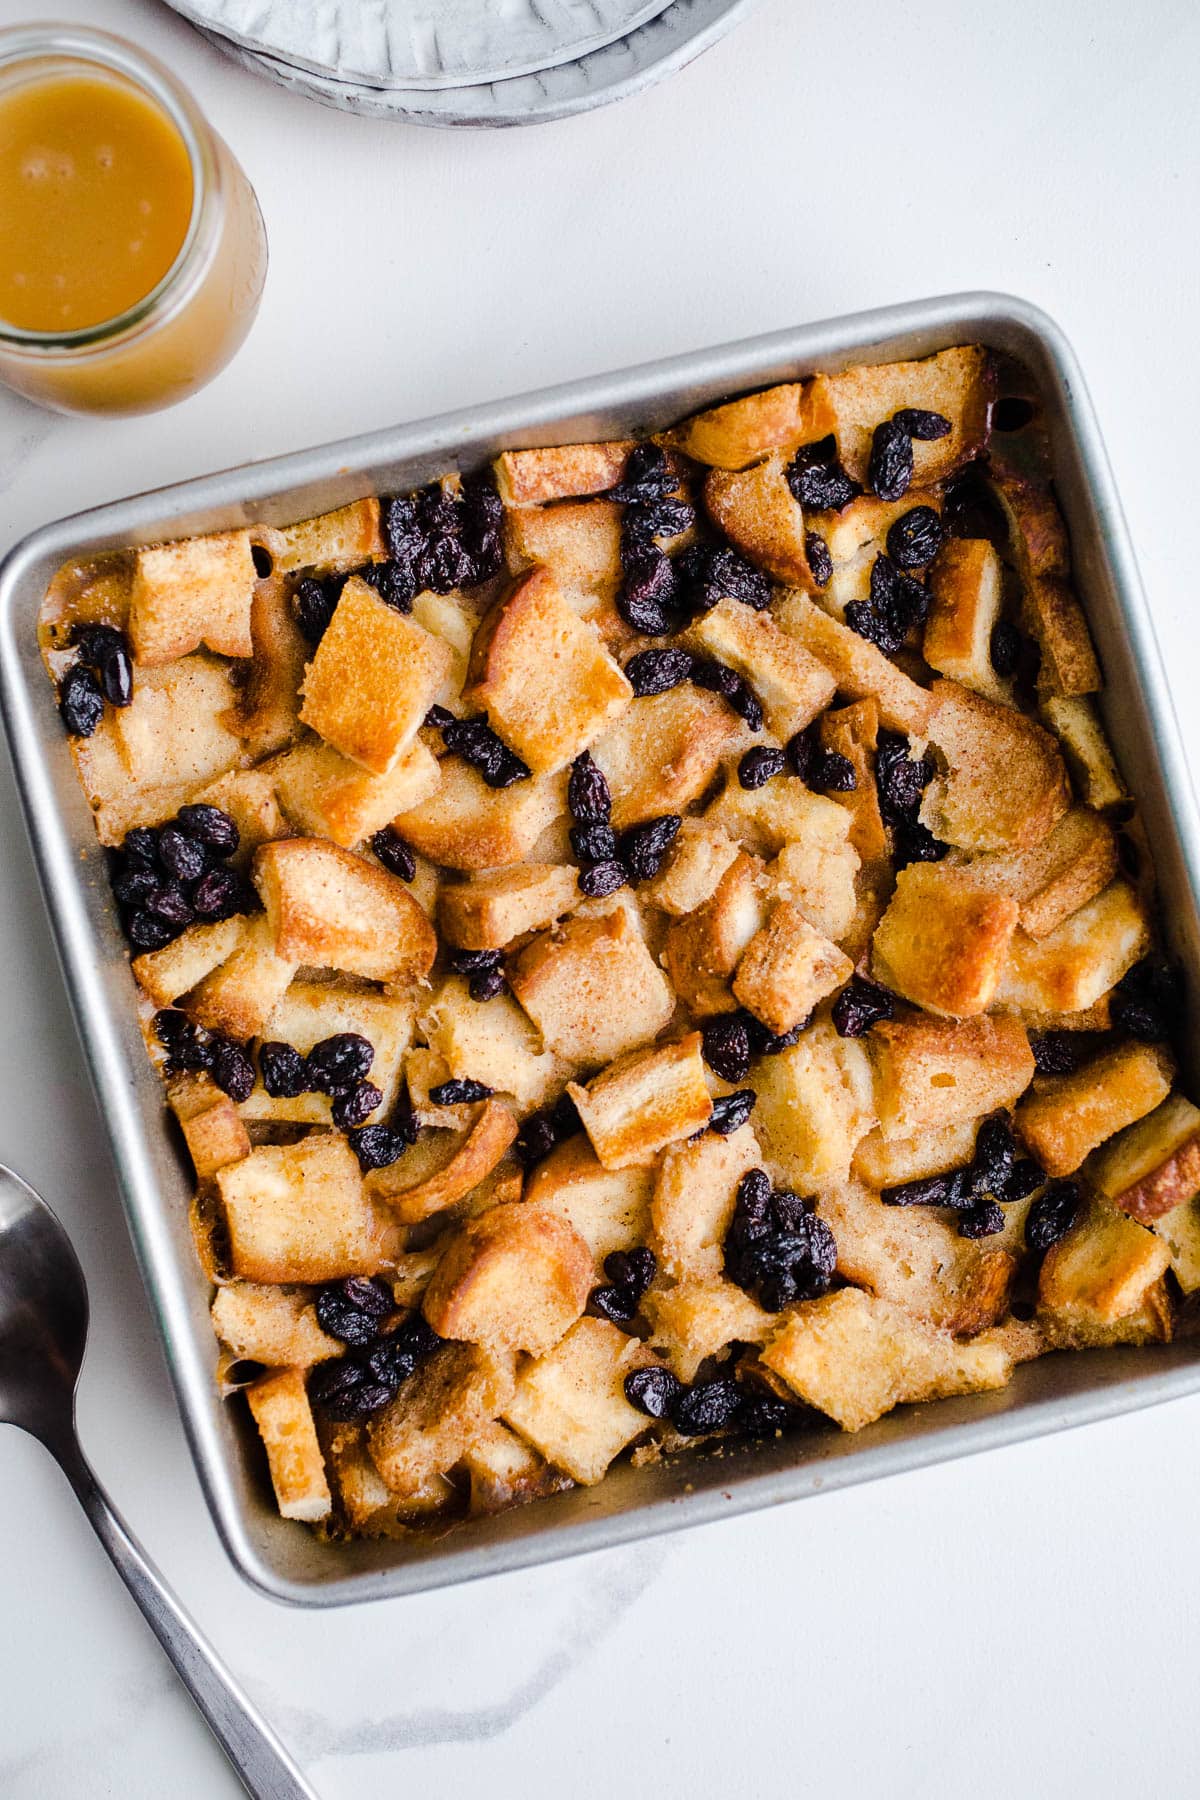 Bread pudding with raisins in a square baking pan.